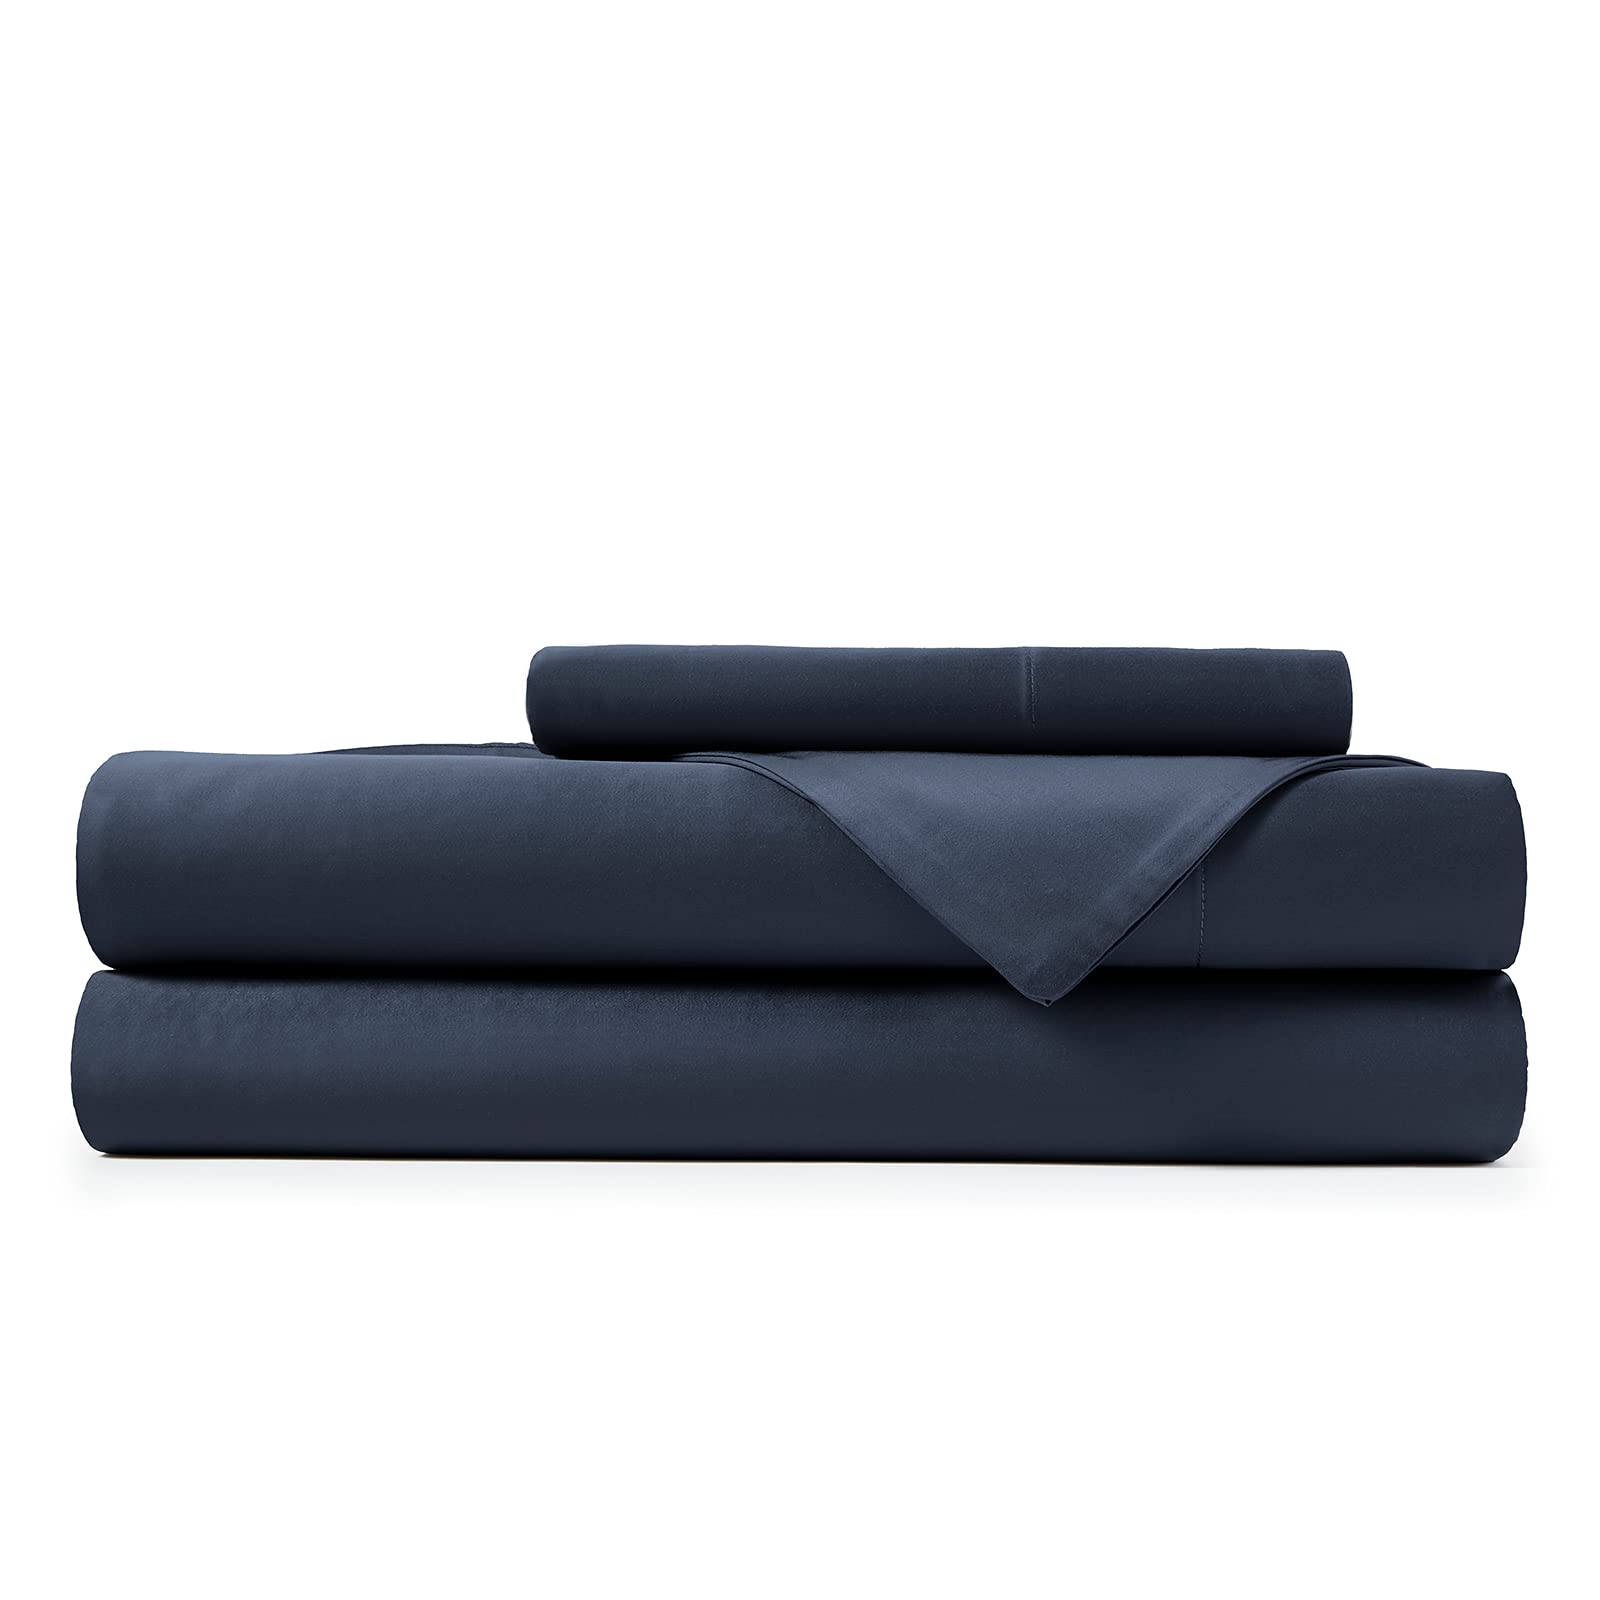 Book Cover Hotel Sheets Direct Viscose Derived from Bamboo Bed Linen Set with Deep Pocket, 4-Piece Set, Navy Blue, Twin Navy Blue Twin